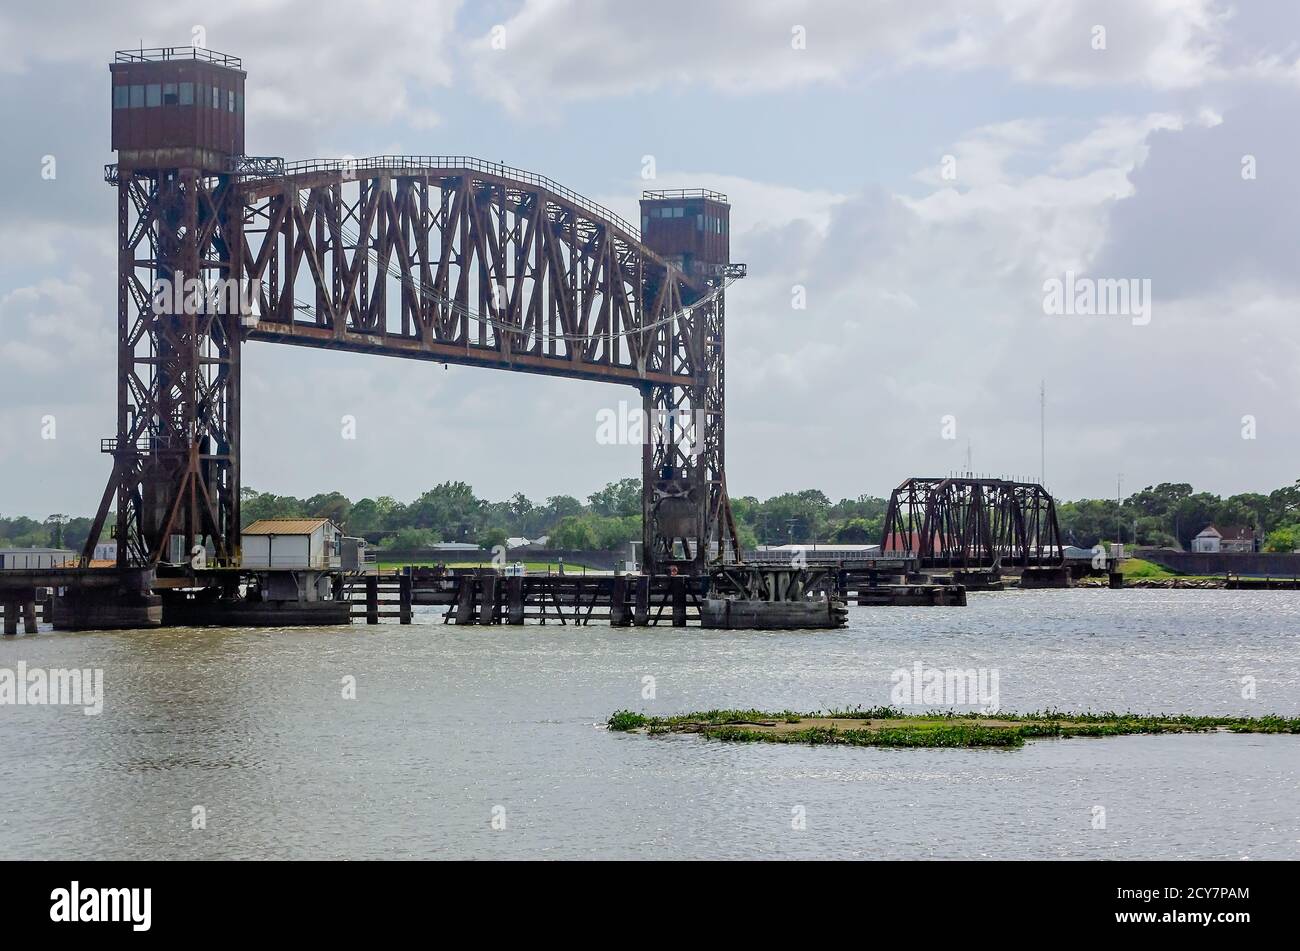 The Southern Pacific Railroad Lift Bridge is pictured, Aug. 25, 2020, in Morgan City, Louisiana. Stock Photo